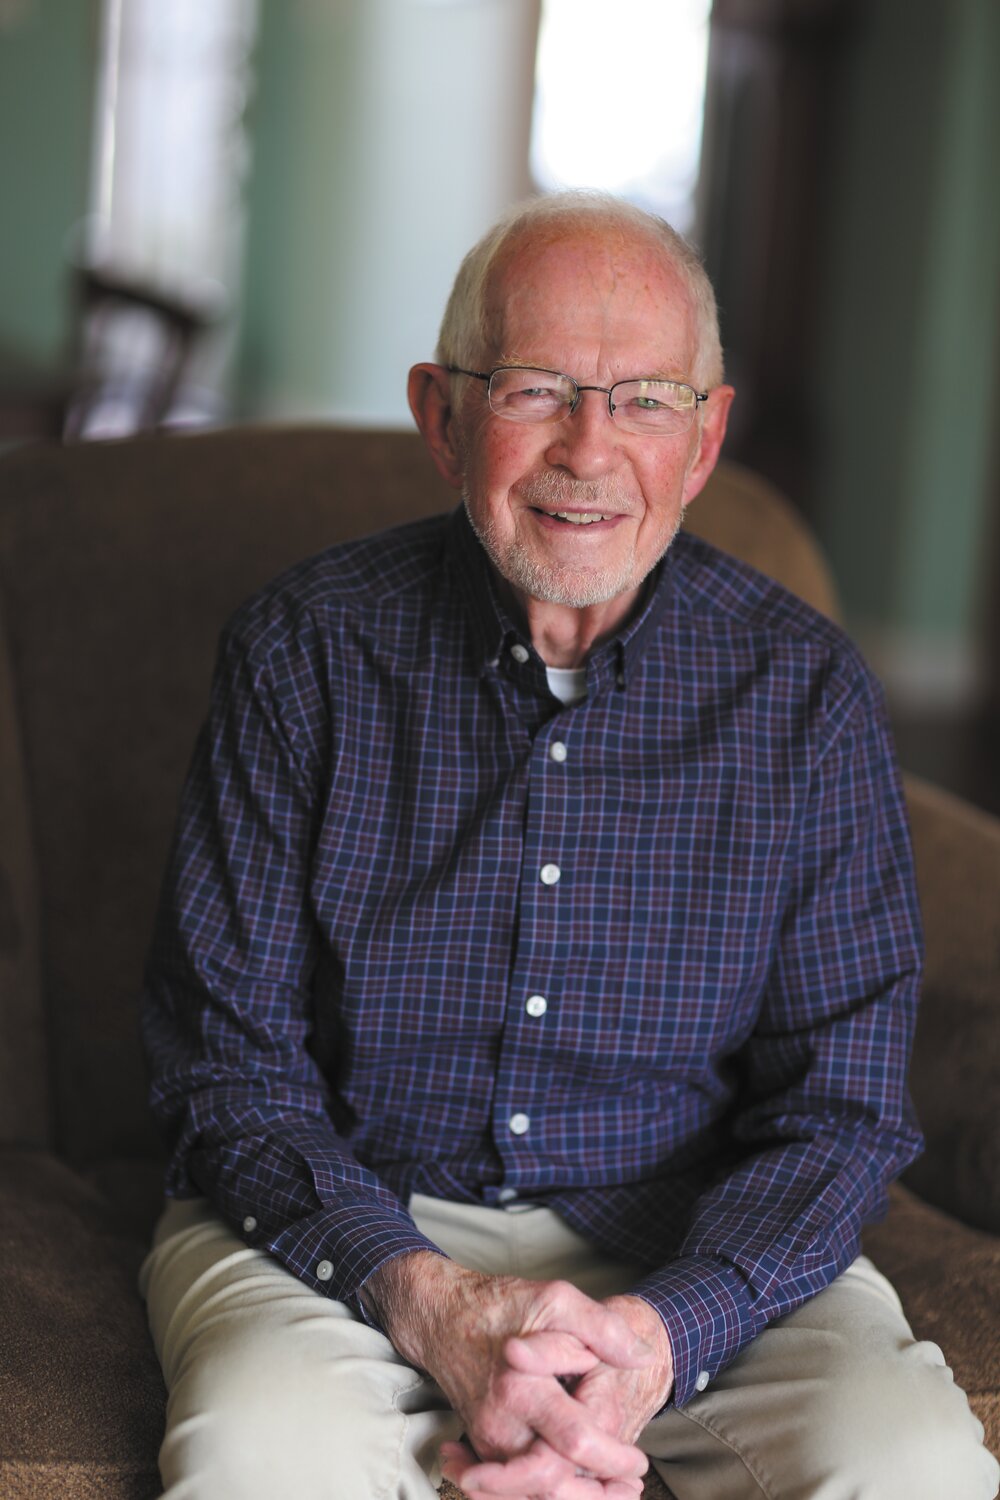 Dr. Lester Hearson taught and mentored countless students during his 30 years at Wabash College. Two of his former students have established an endowed scholarship in his name.